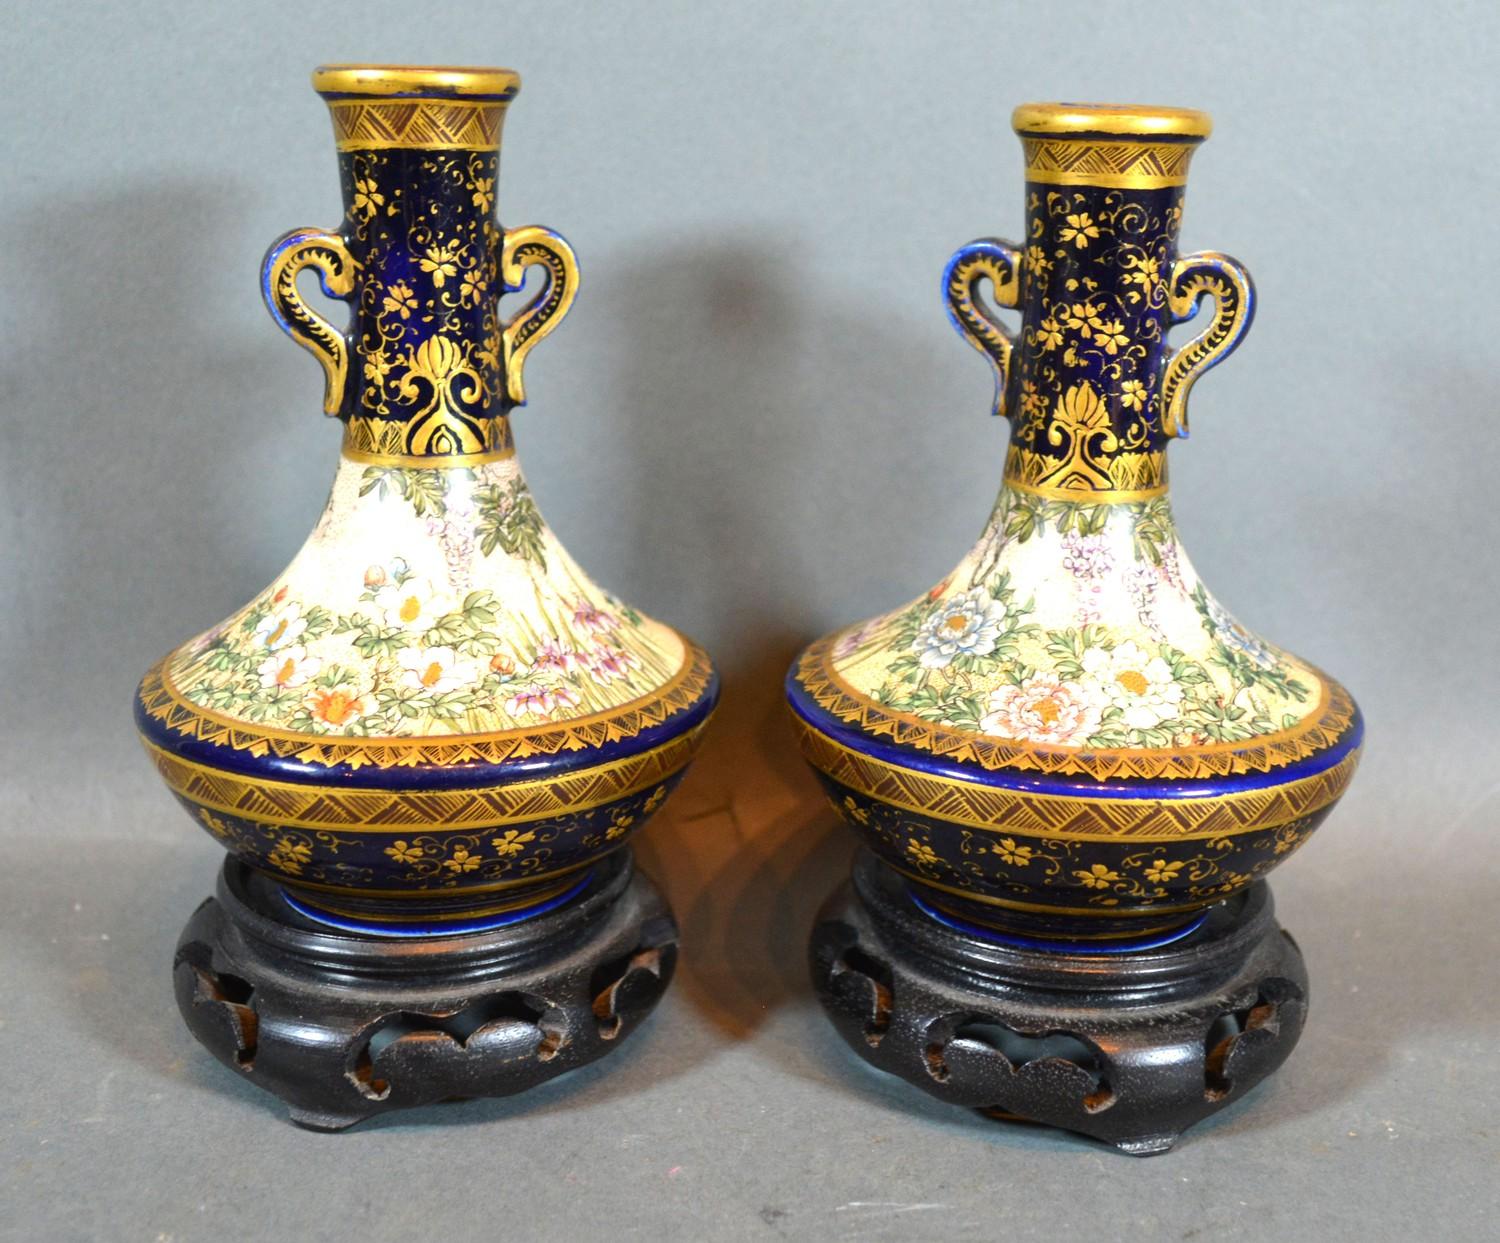 A Pair of Late 19th or Early 20th Century Satsuma Earthenware Two Handled Bottleneck Vases each